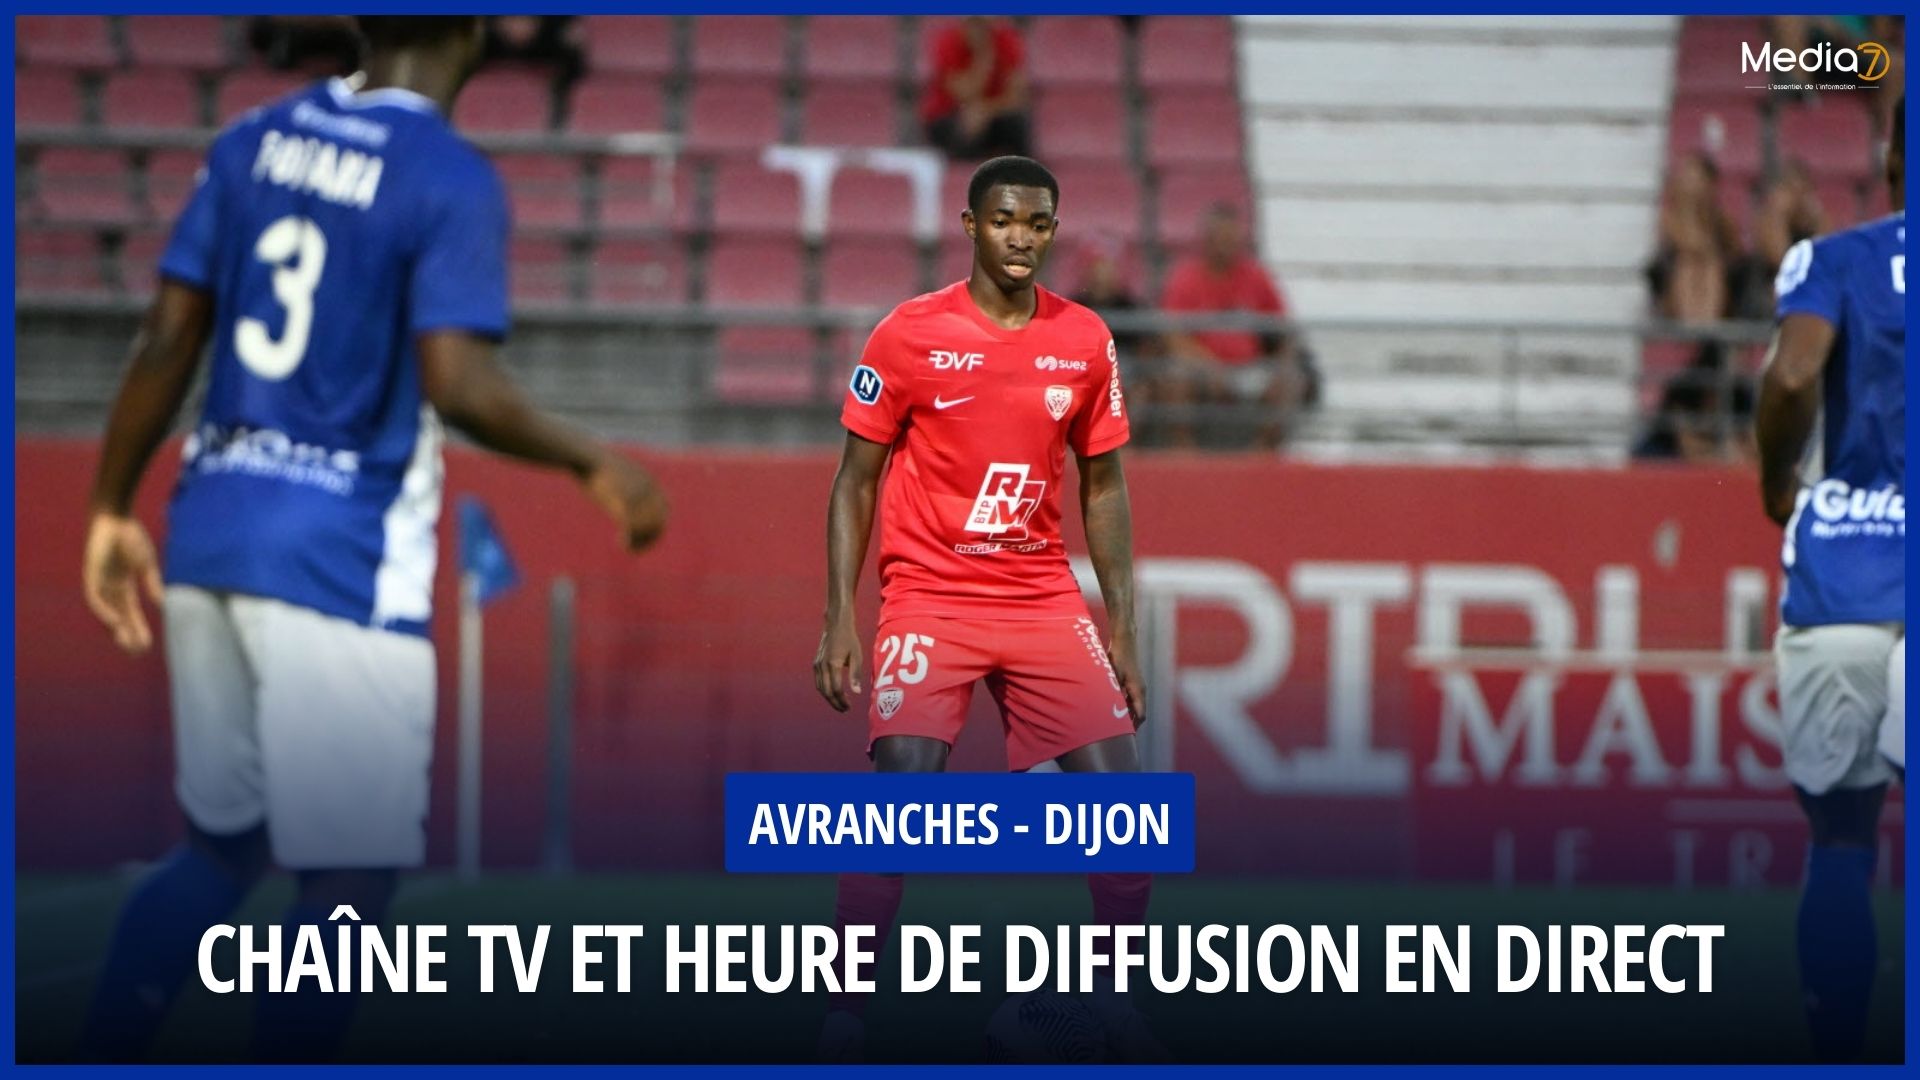 Live broadcast of the Avranches - Dijon match - Media7